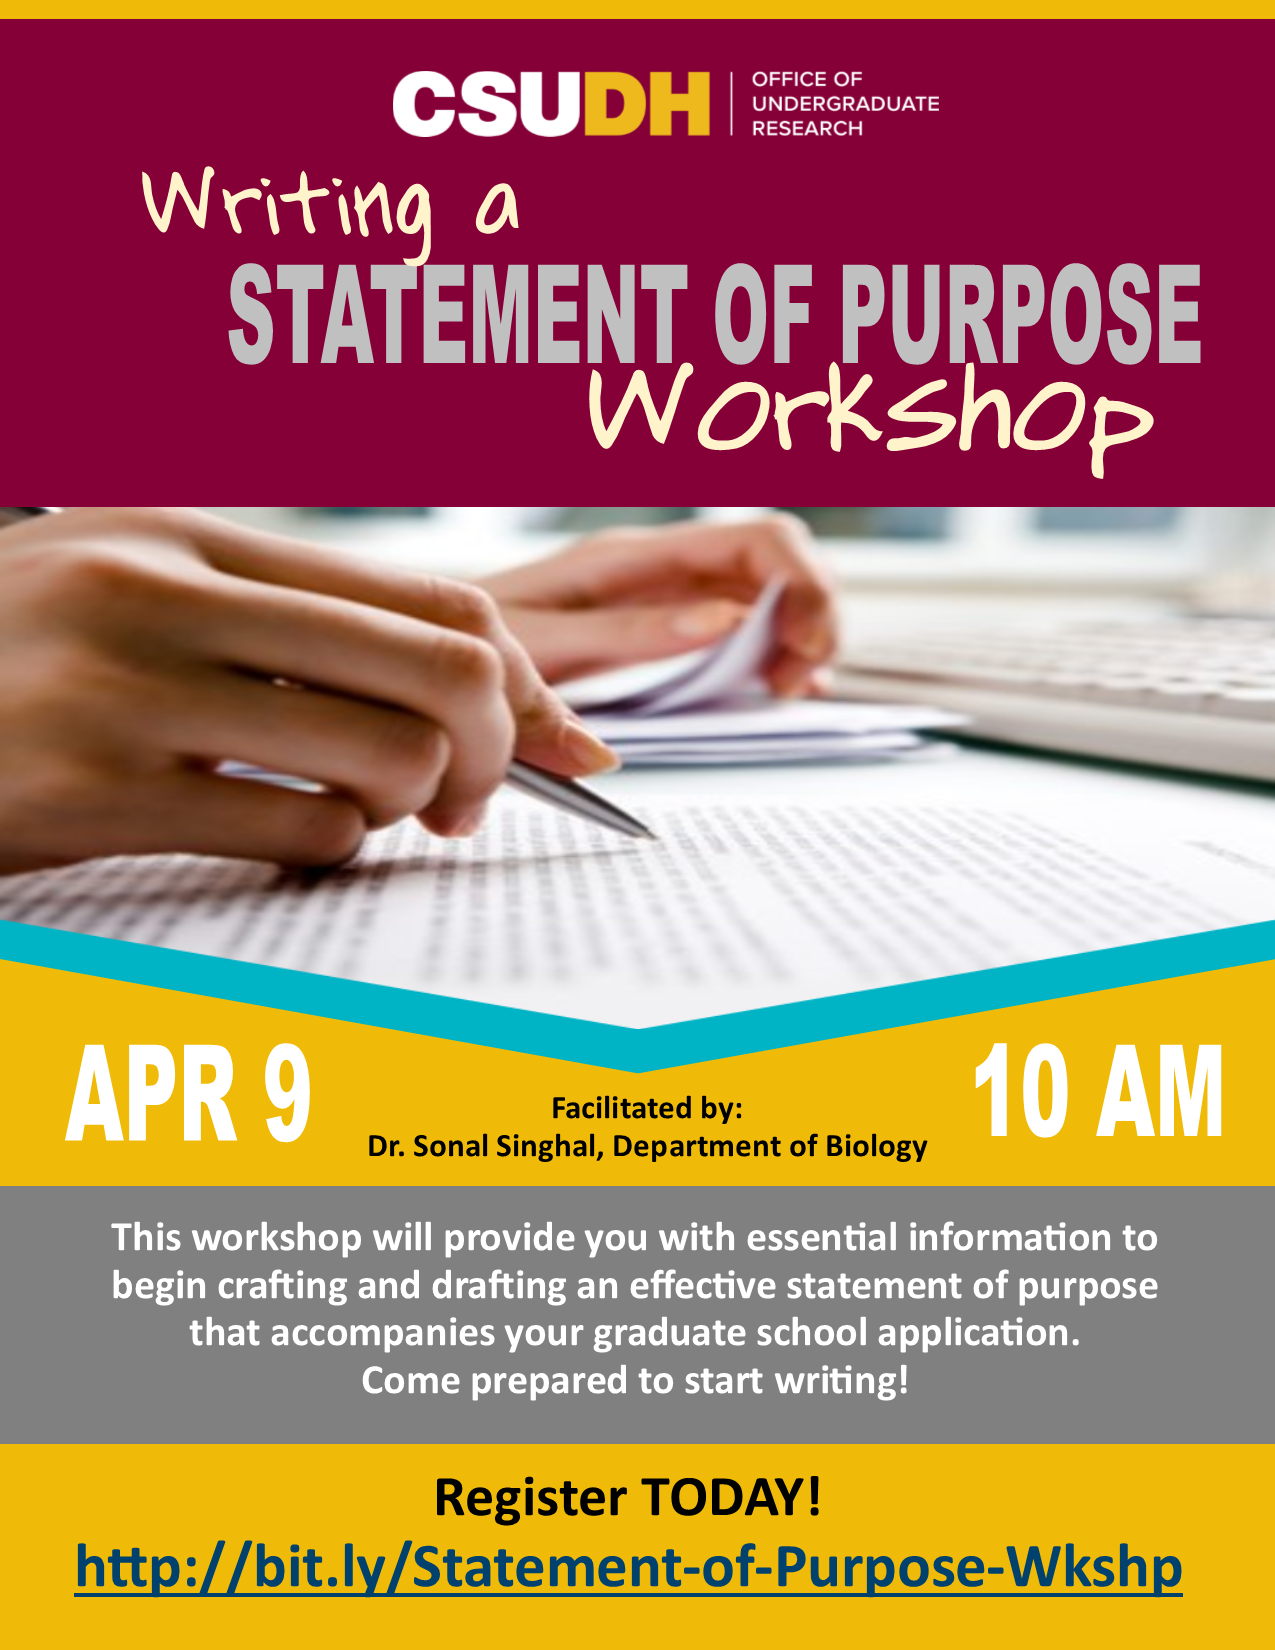 Writing a Statement of Purpose Workshop